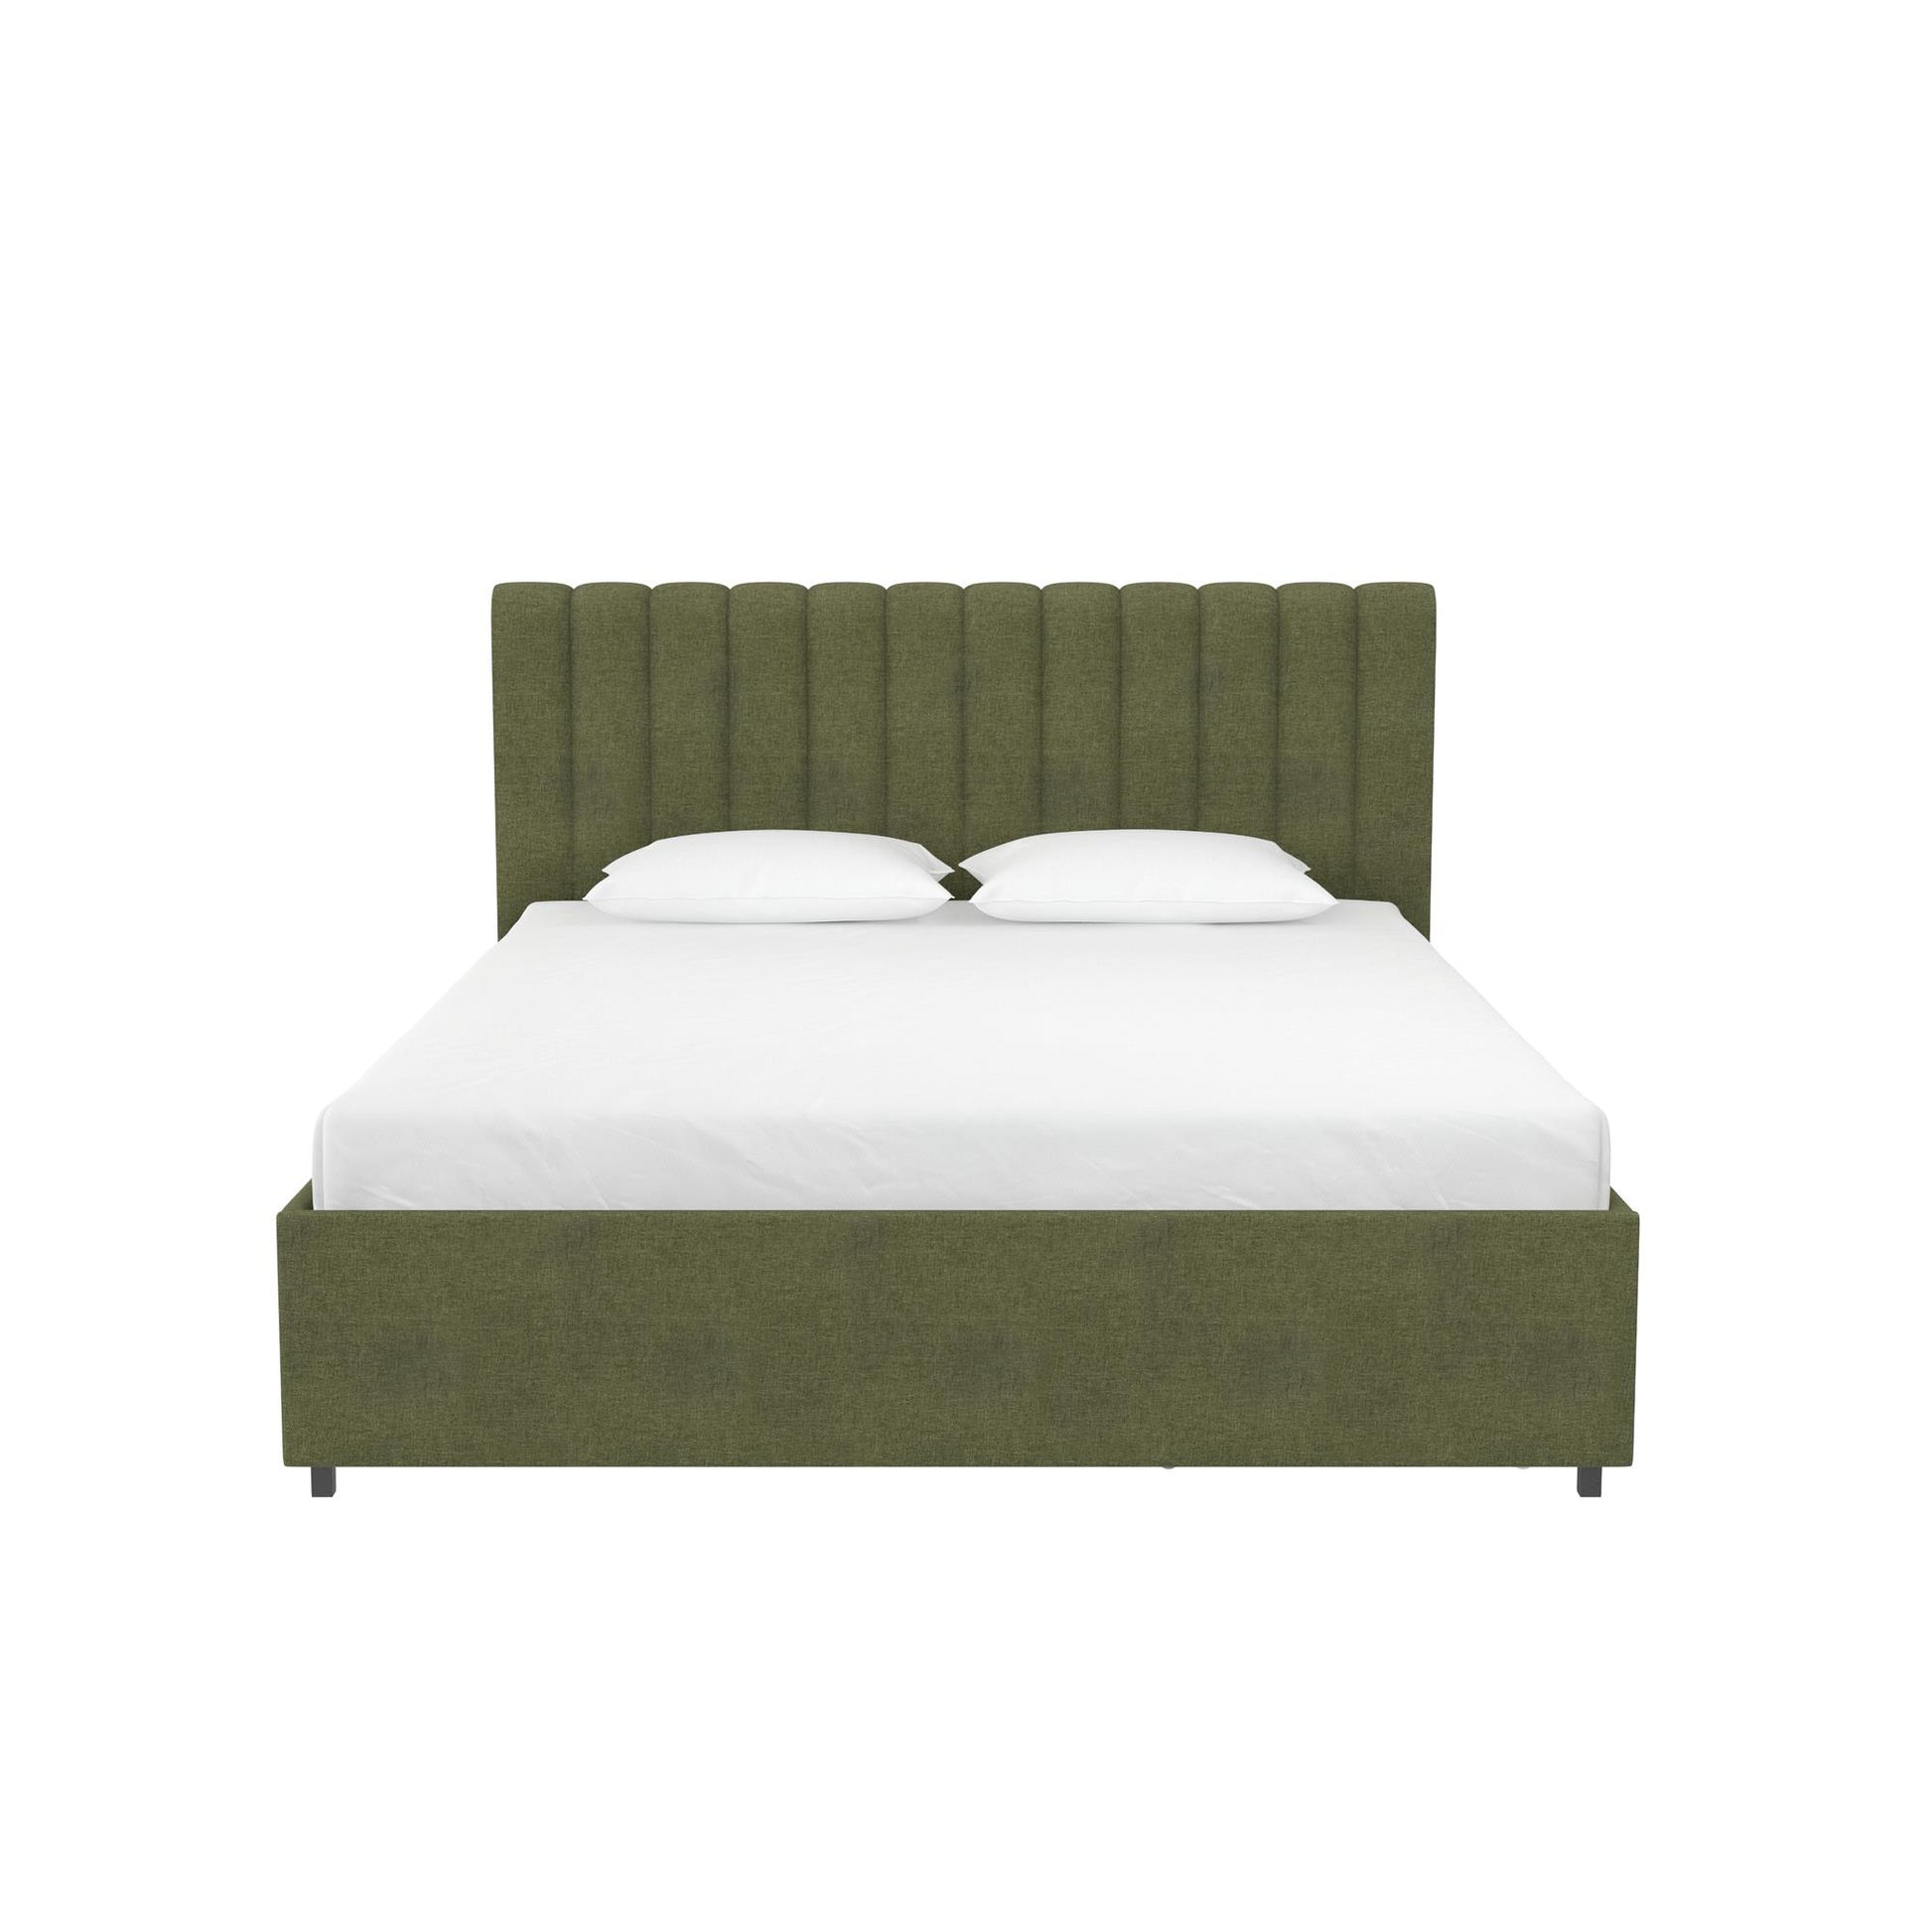 Novogratz Brittany Upholstered Bed with Storage Drawers, Queen, Olive Green - Olive Green - Queen